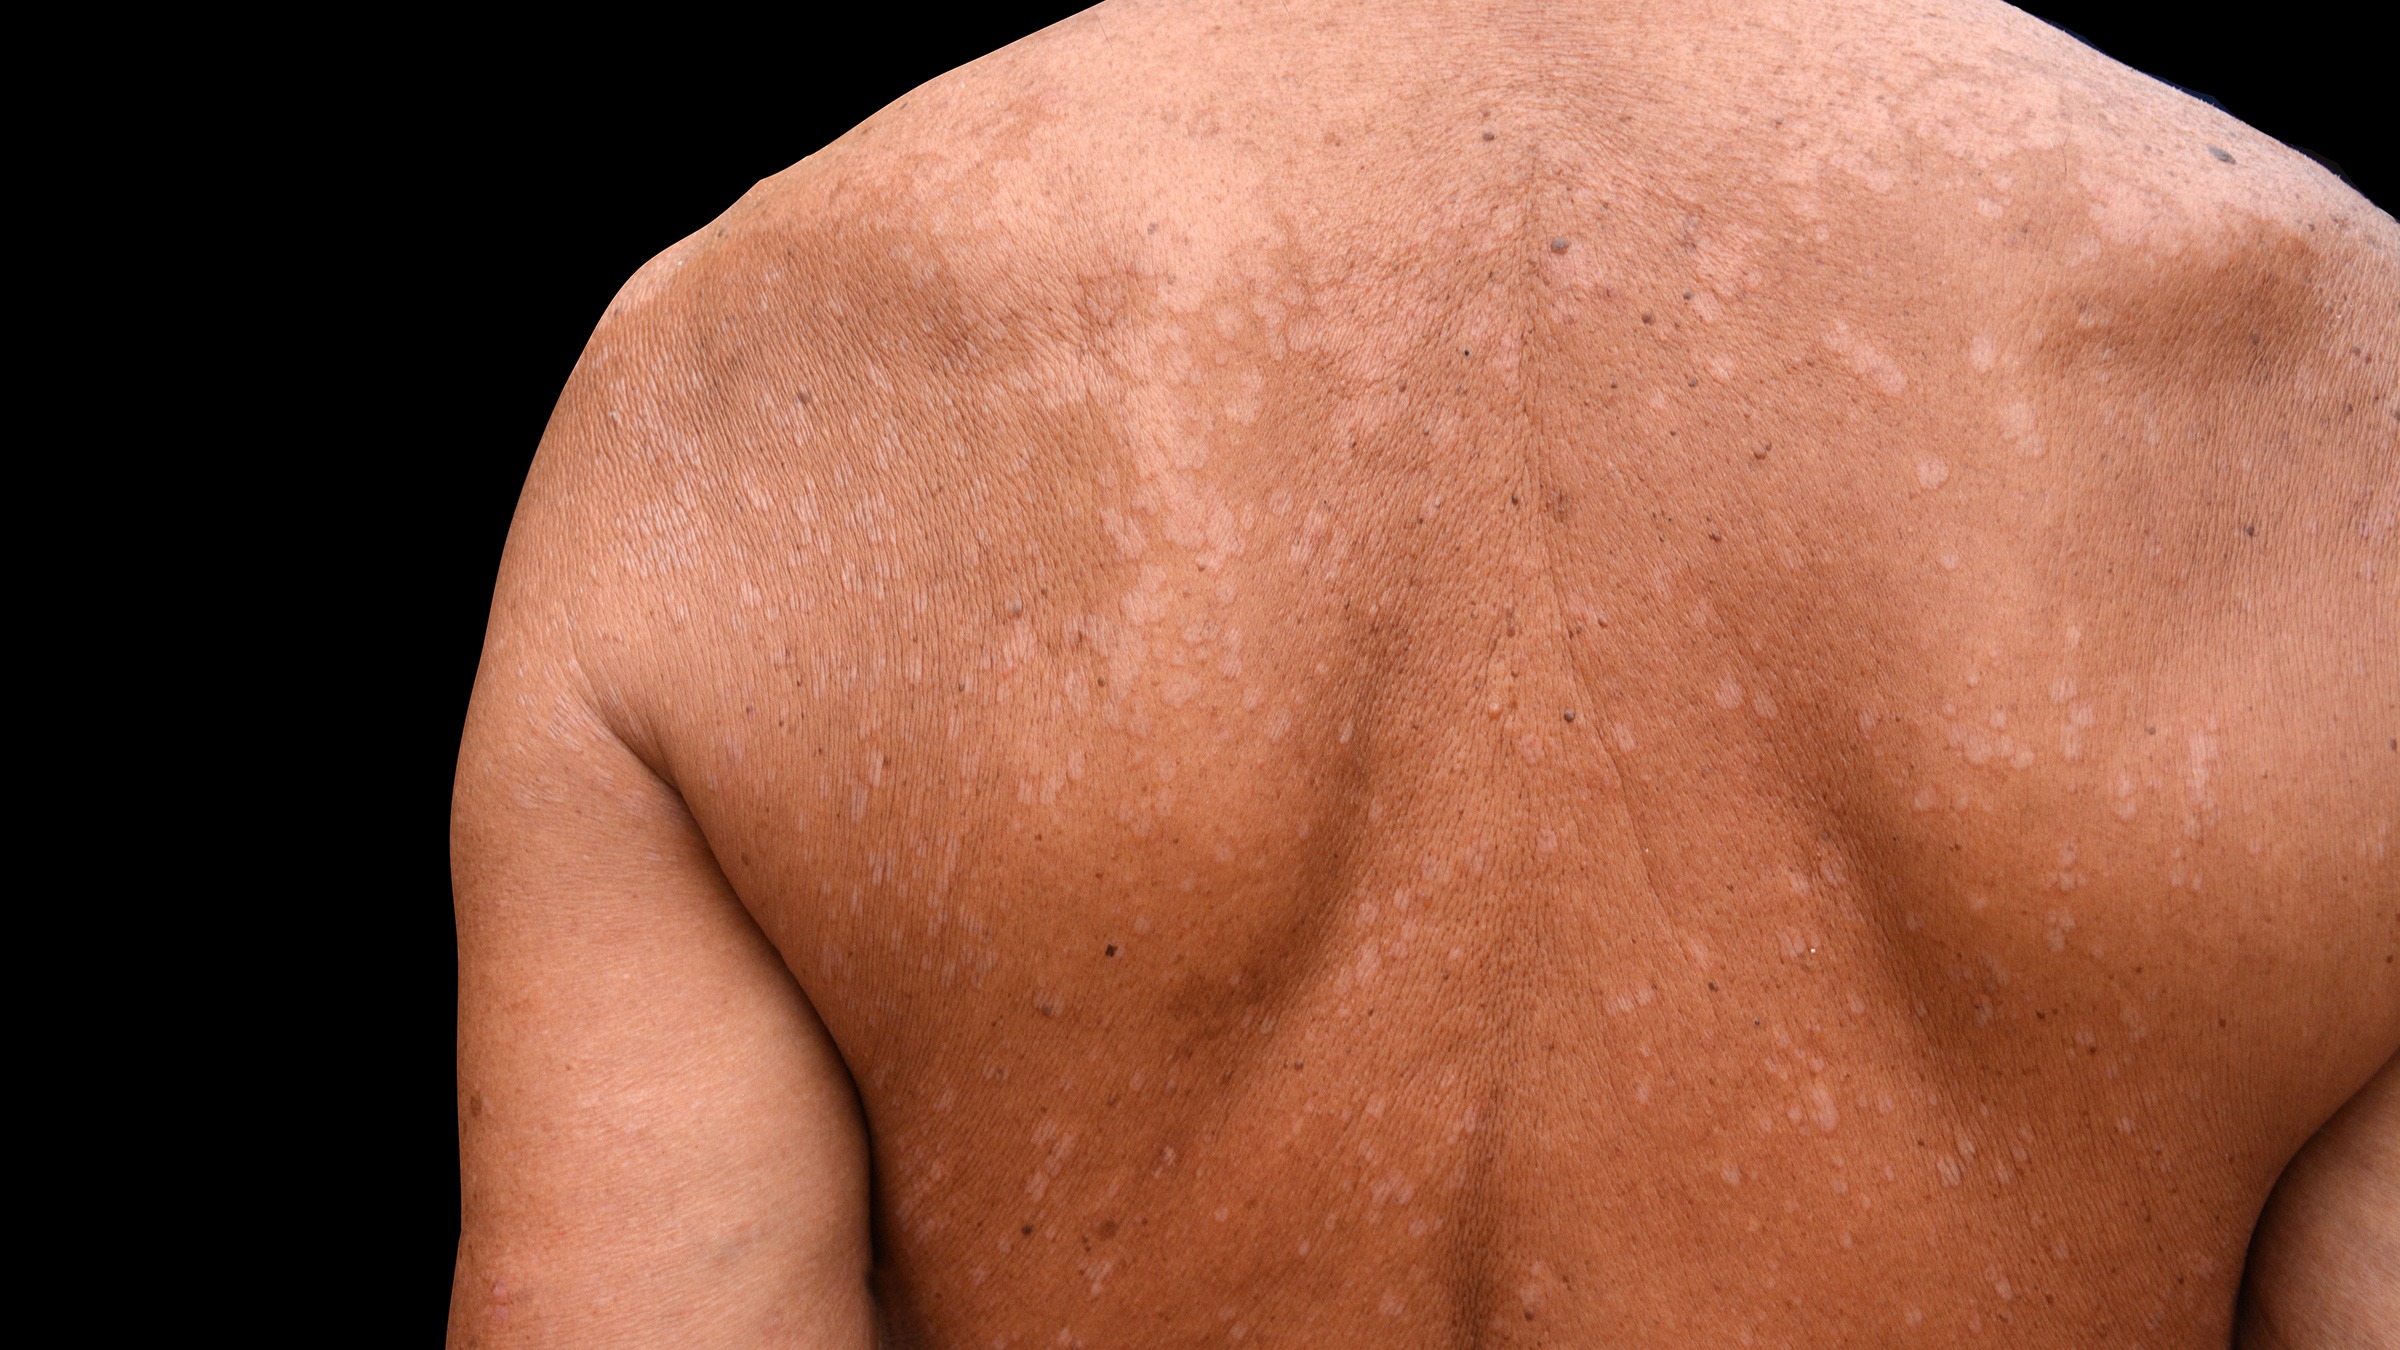 Medical: Tinea versicolor is a condition caused by the Malassezia